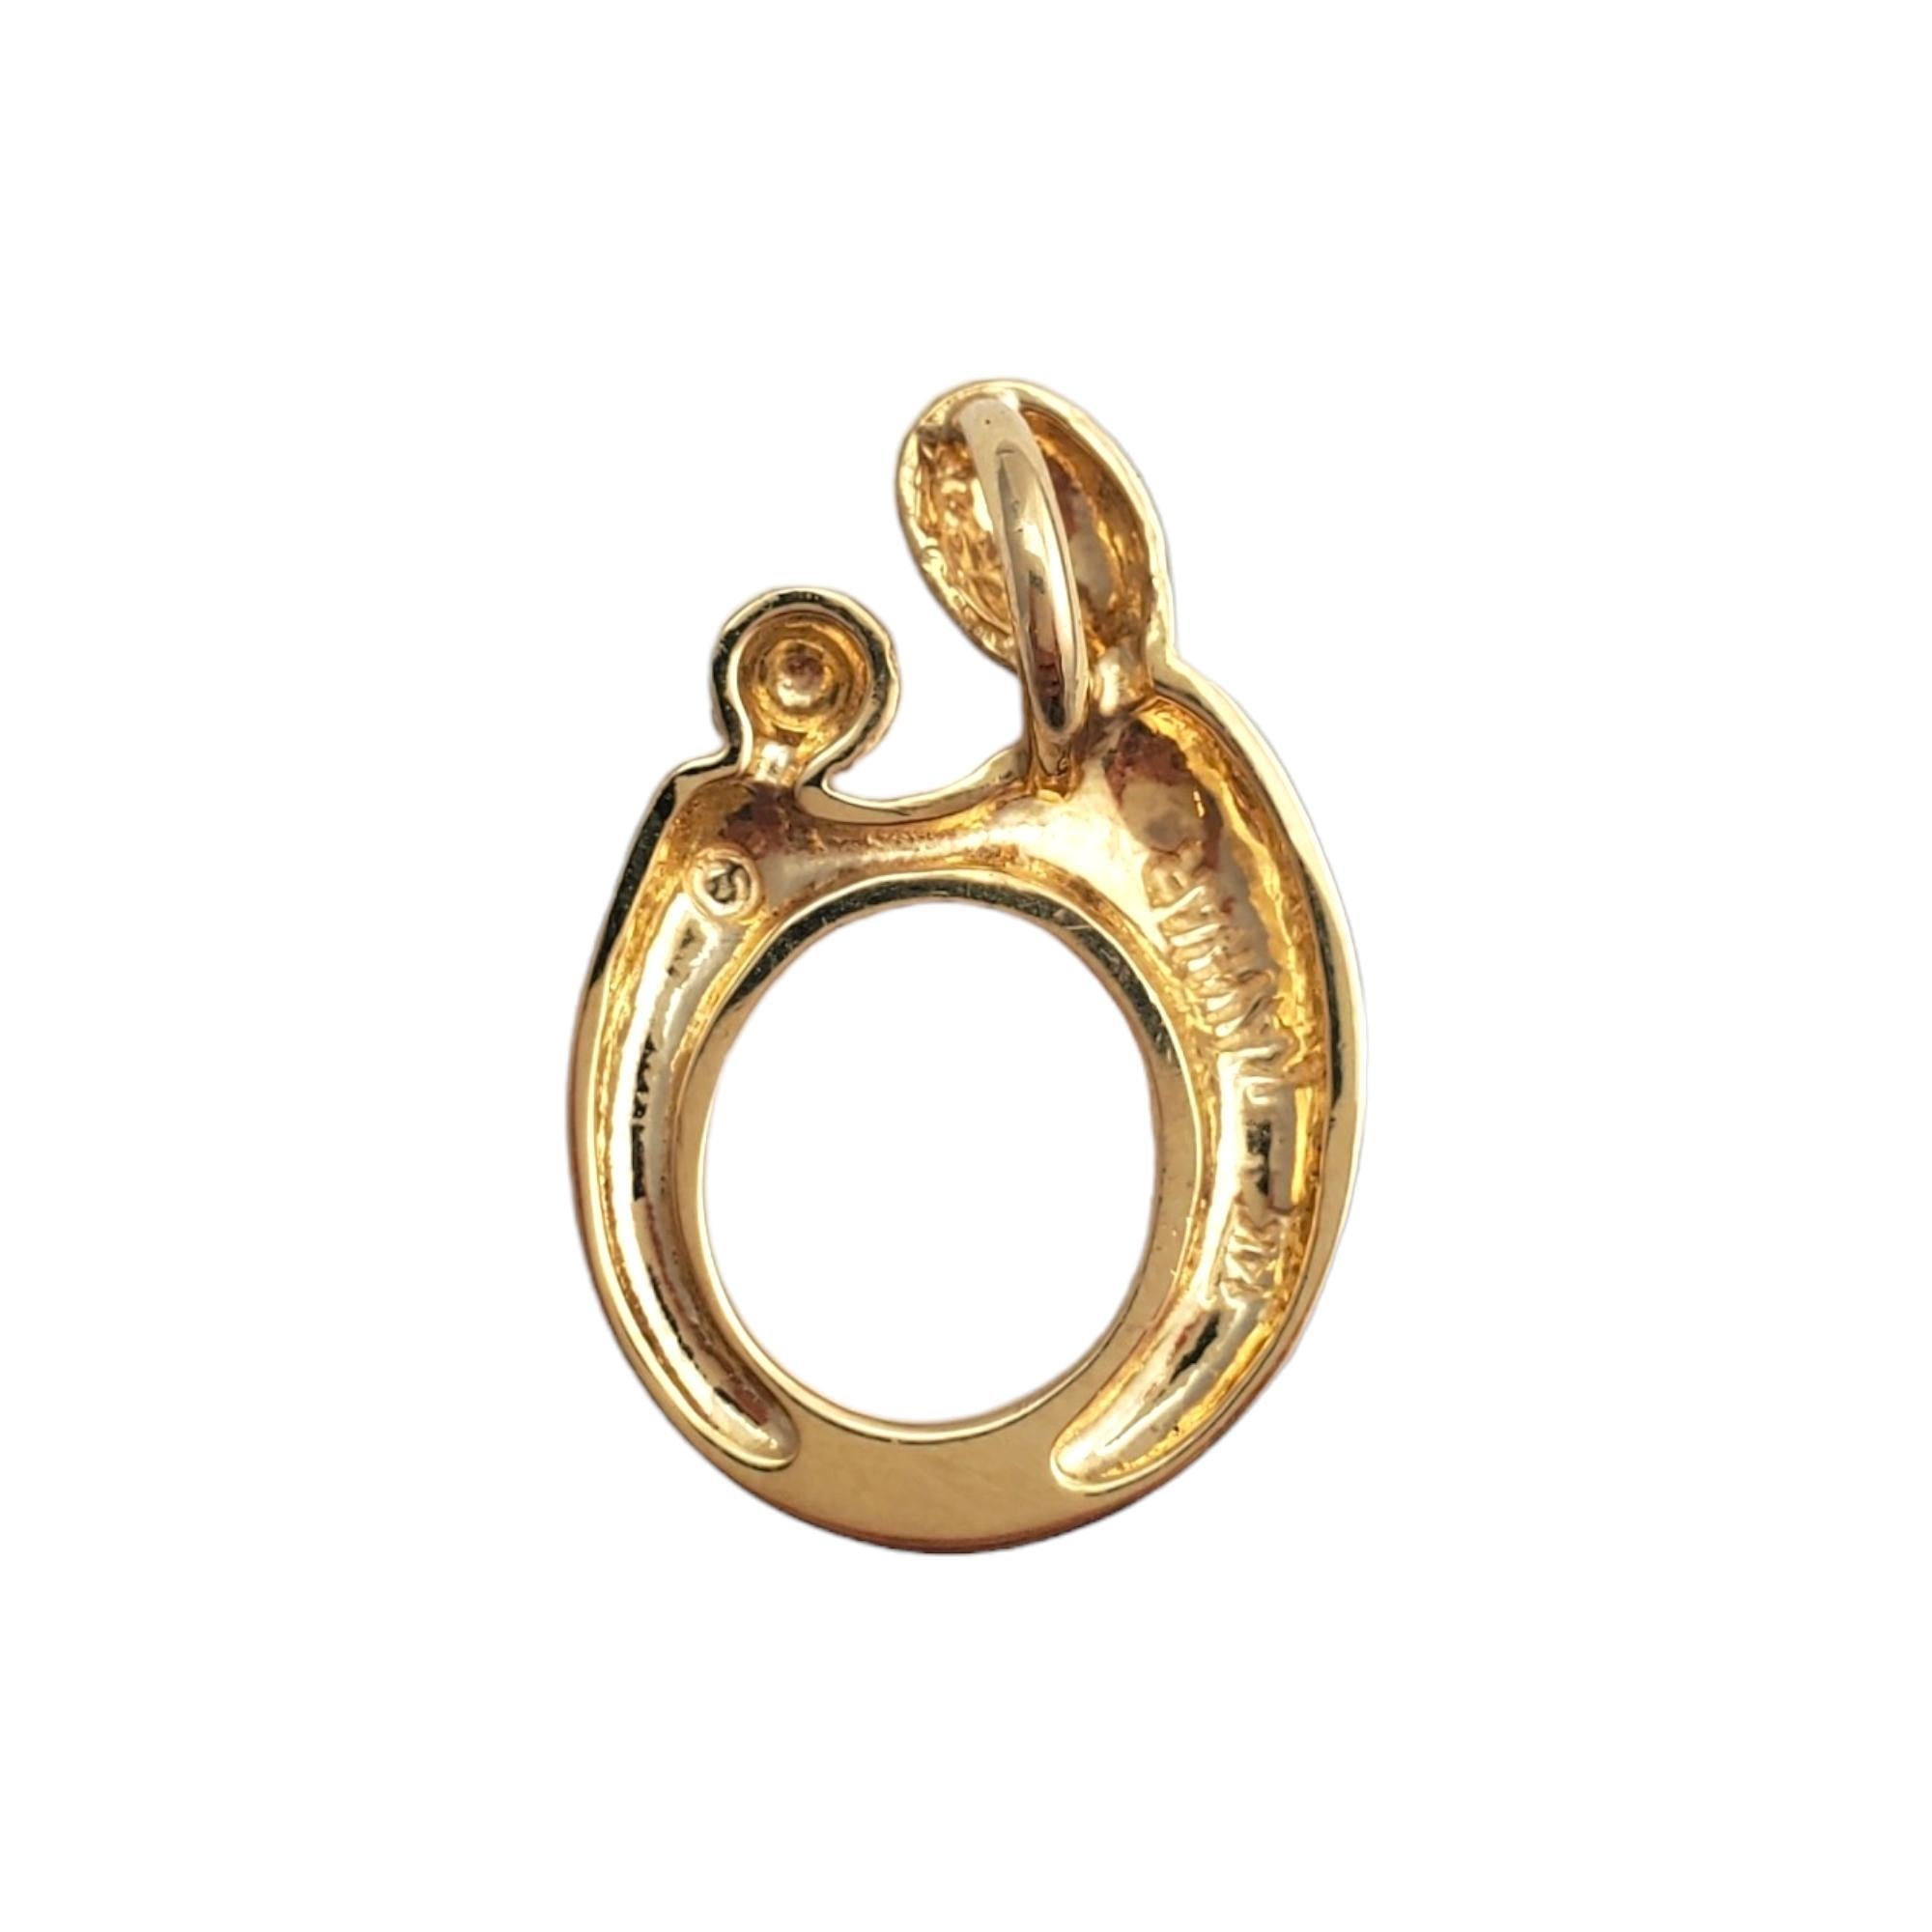 Vintage 14 karat yellow gold mother & child pendant -

Celebrate the unbreakable bond between a mother and child with this pendant that is beautifully crafted in 14K yellow gold. 

Size: 20.6mm x 2.5mm

Stamped: 14K

Weight: 2.0 gr./ 1.2 dwt.

Chain